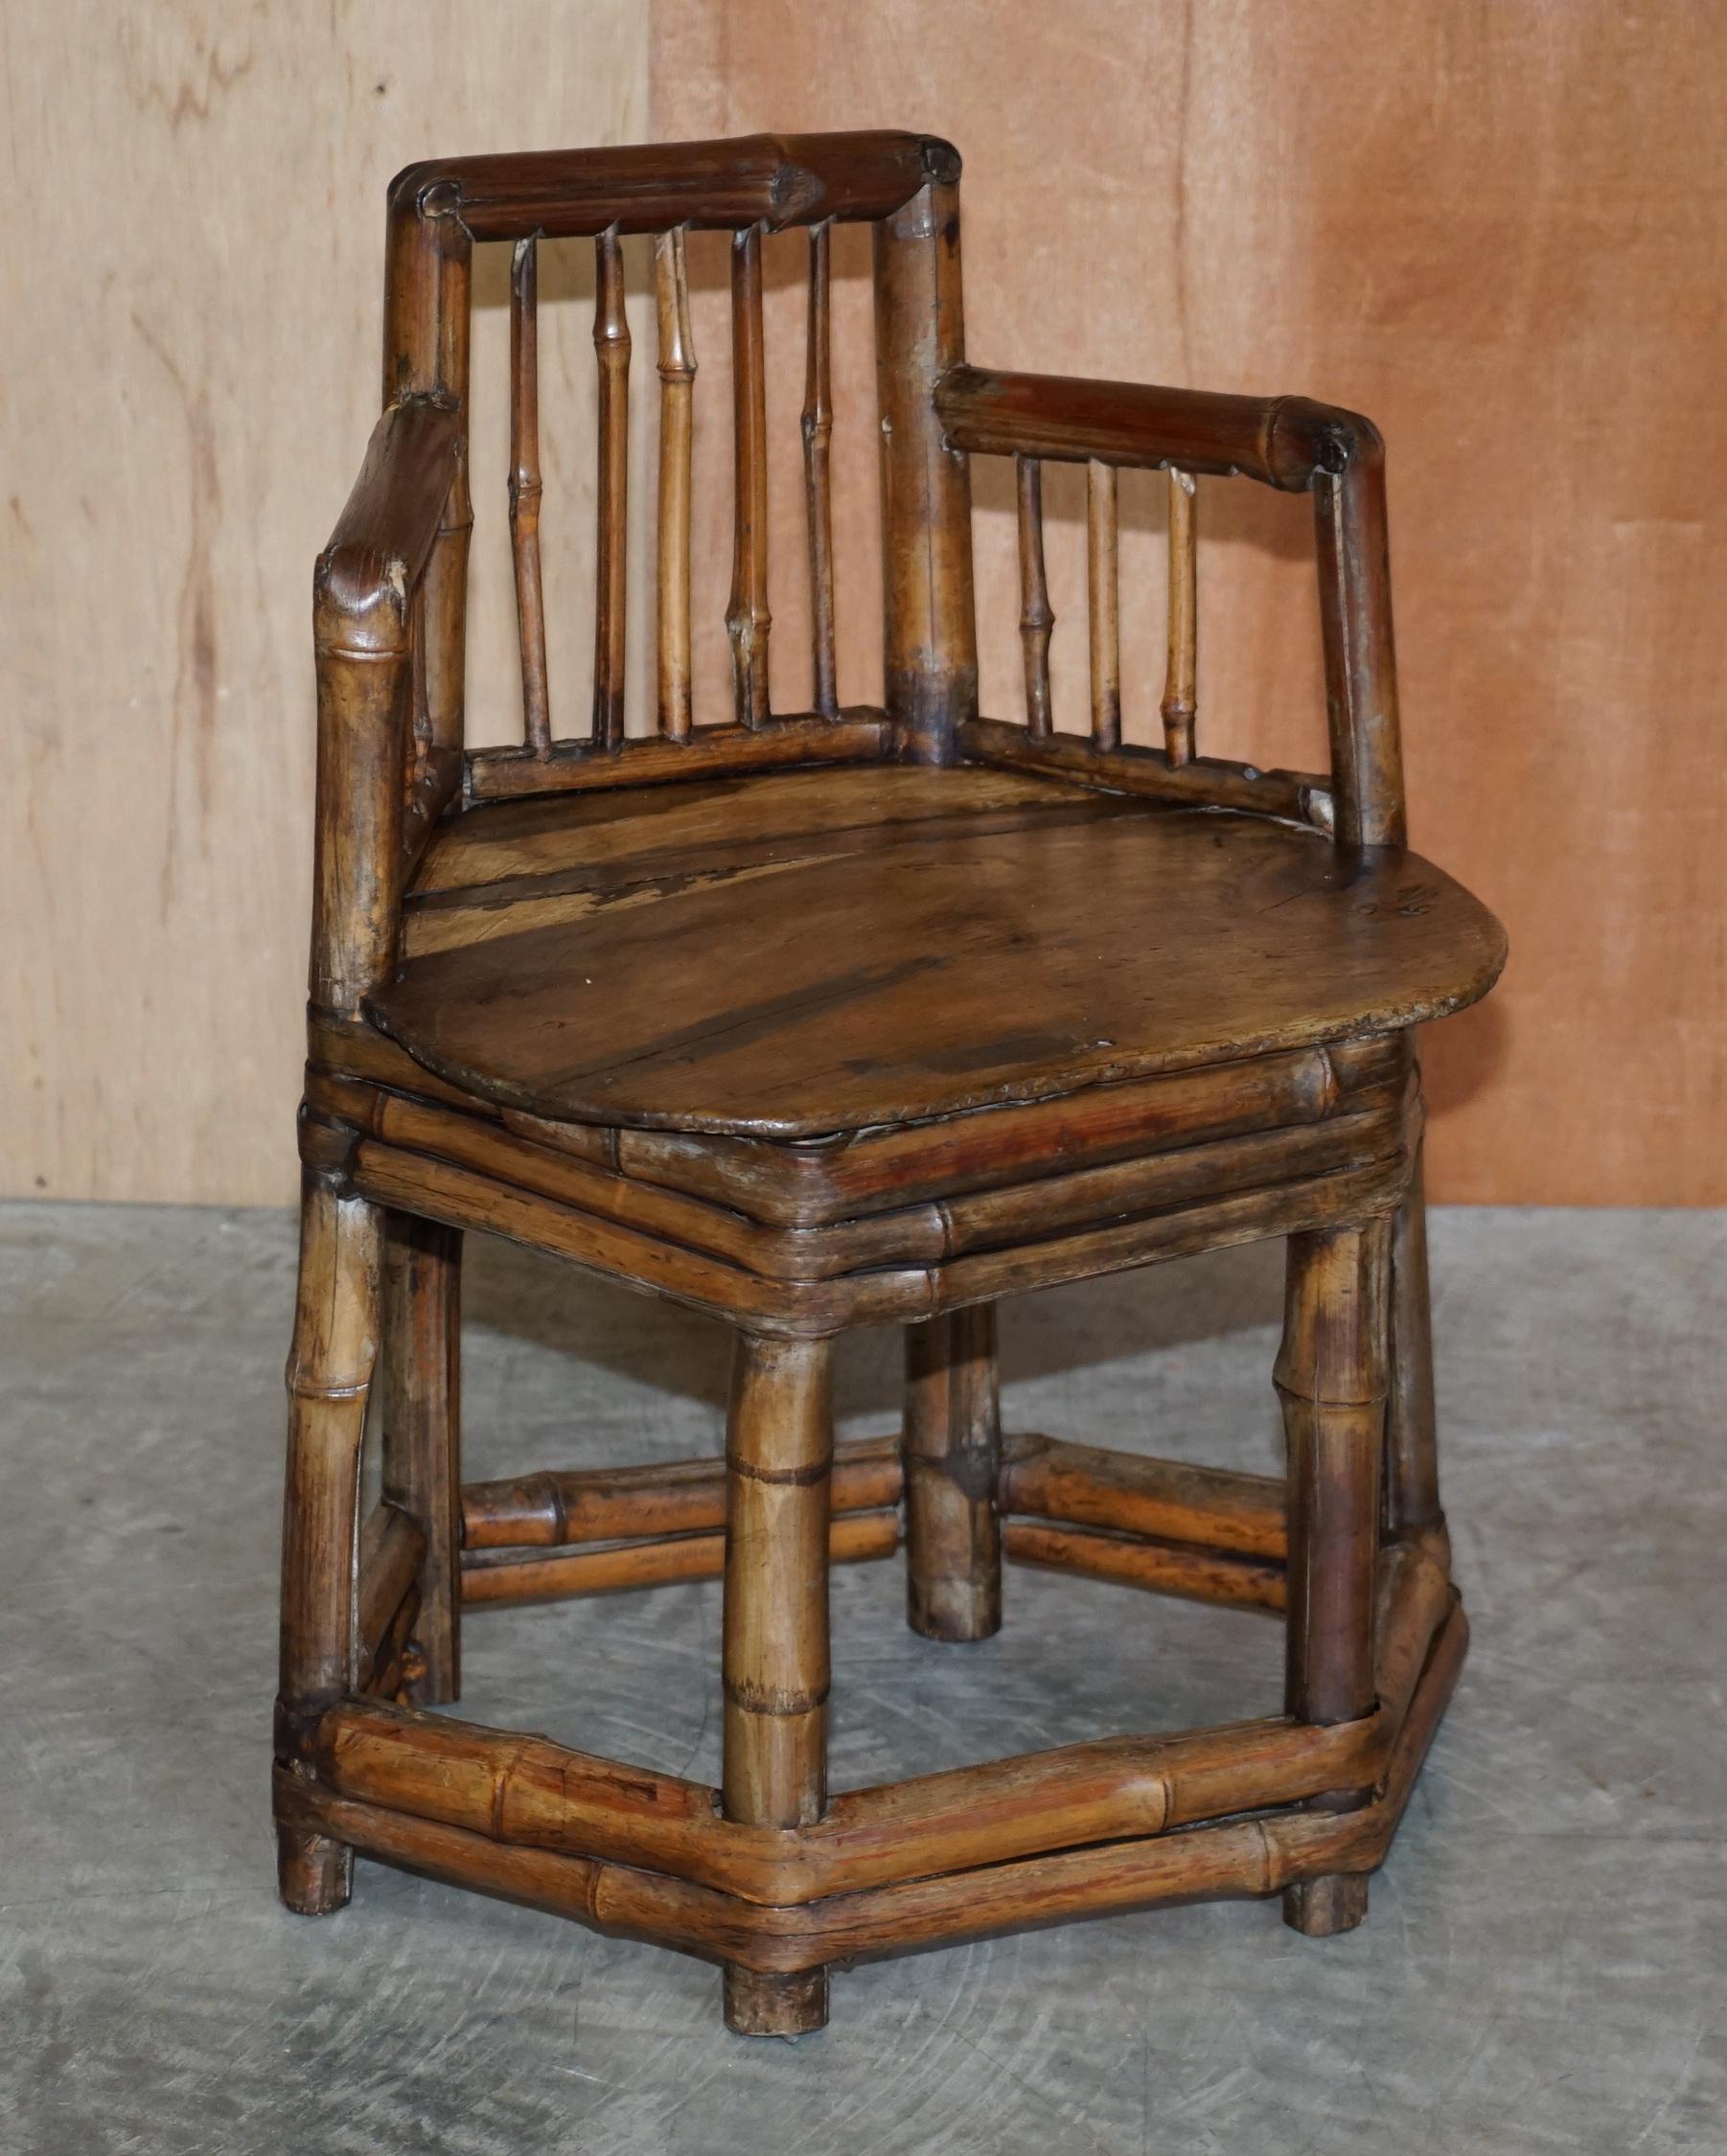 We are delighted to offer this lovely original pair of circa 1800 primitive Chinese bamboo framed occasional chairs

A very rare and highly decorative pair of bamboo framed chairs, this are very primitive and naively made as was the style of the